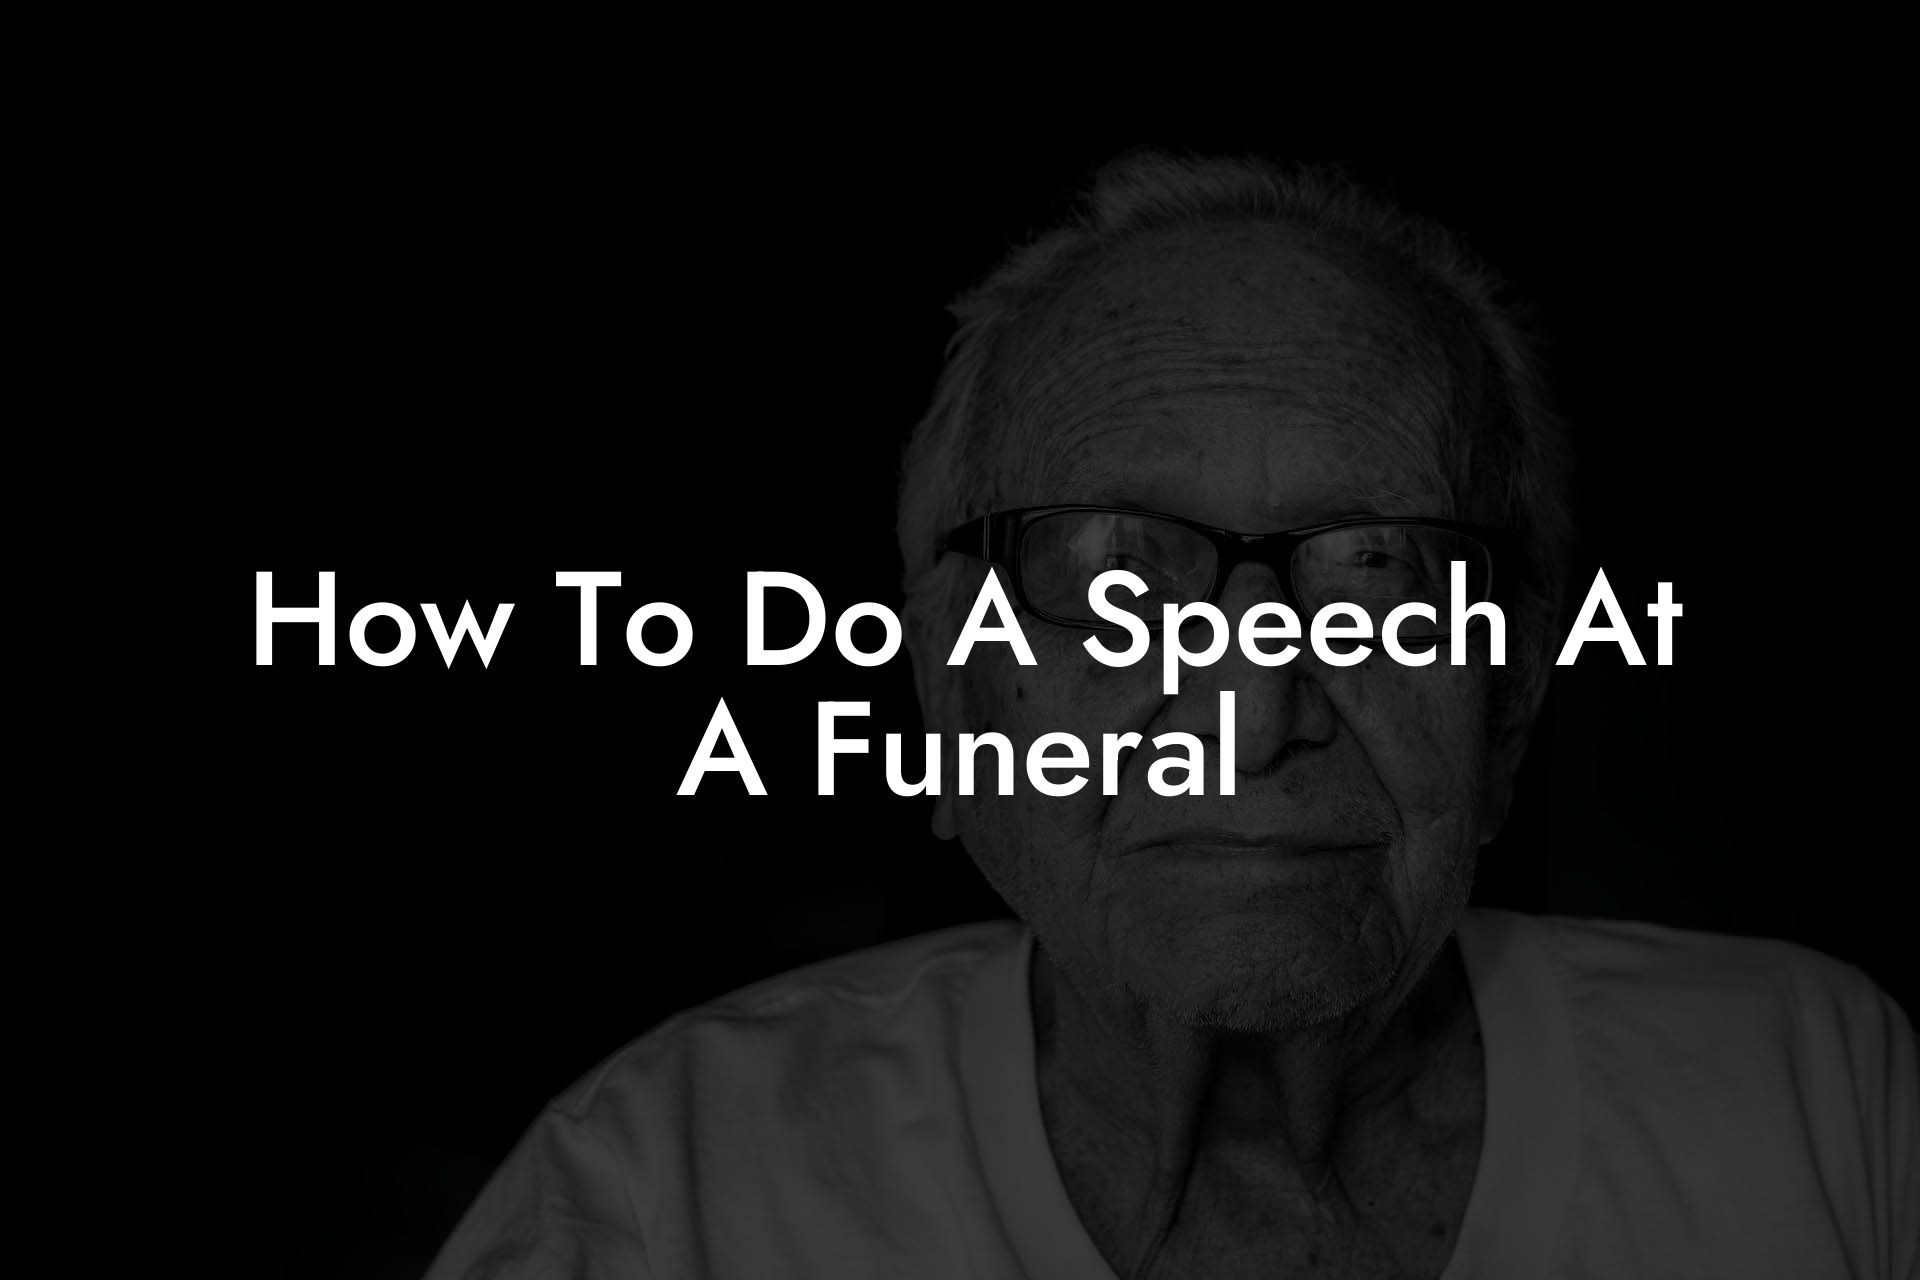 How To Do A Speech At A Funeral